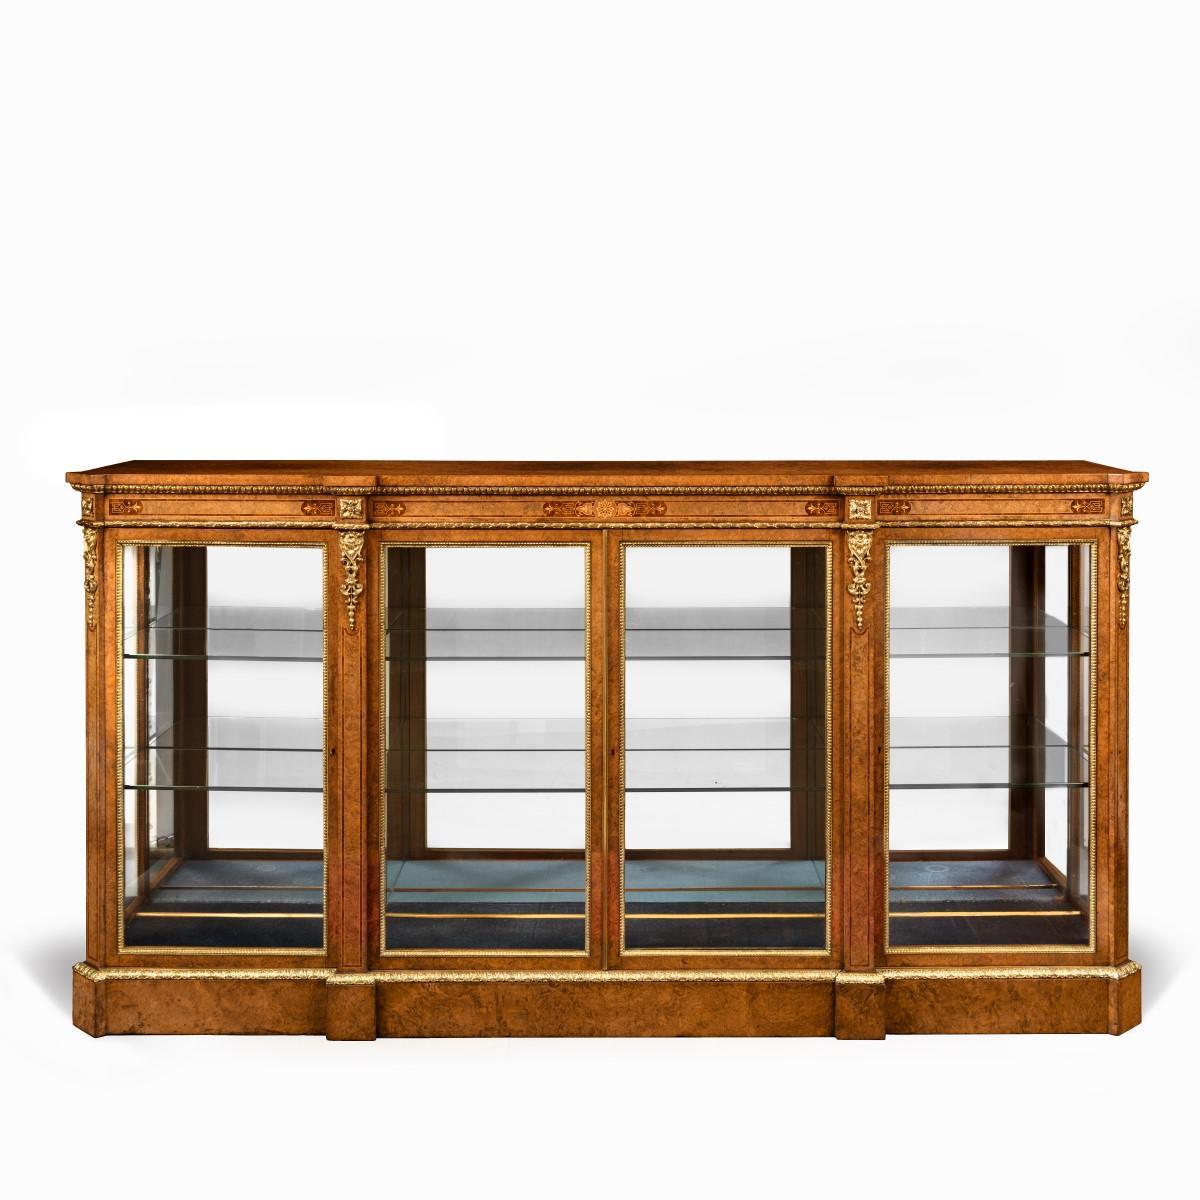 A mid Victorian burr walnut display cabinet, of rectangular breakfront form, with four glazed doors and sides, mirror-backed with two adjustable glass shelves, decorated with delicate boxwood and thoya inlays and fine quality ormolu mounts.